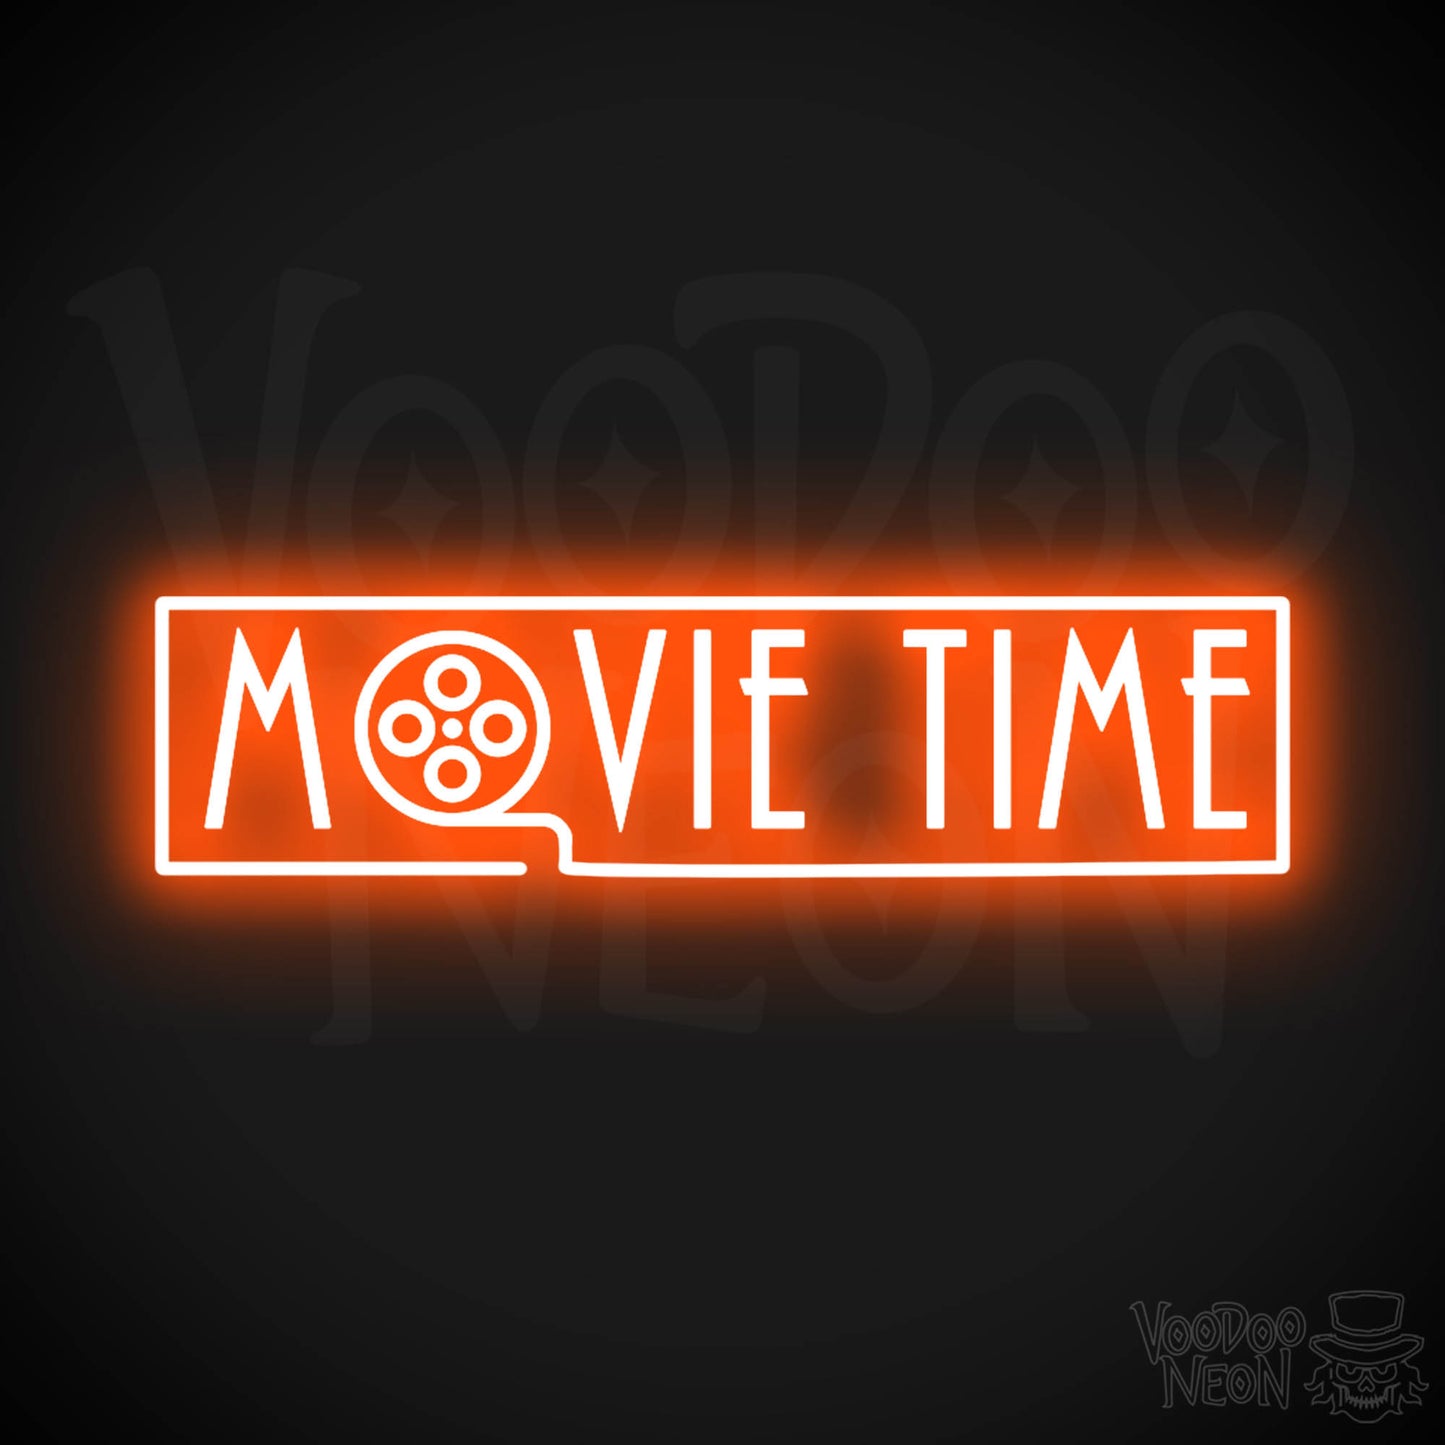 Movie Time Neon Sign - Neon Movie Time Sign - Color Orange